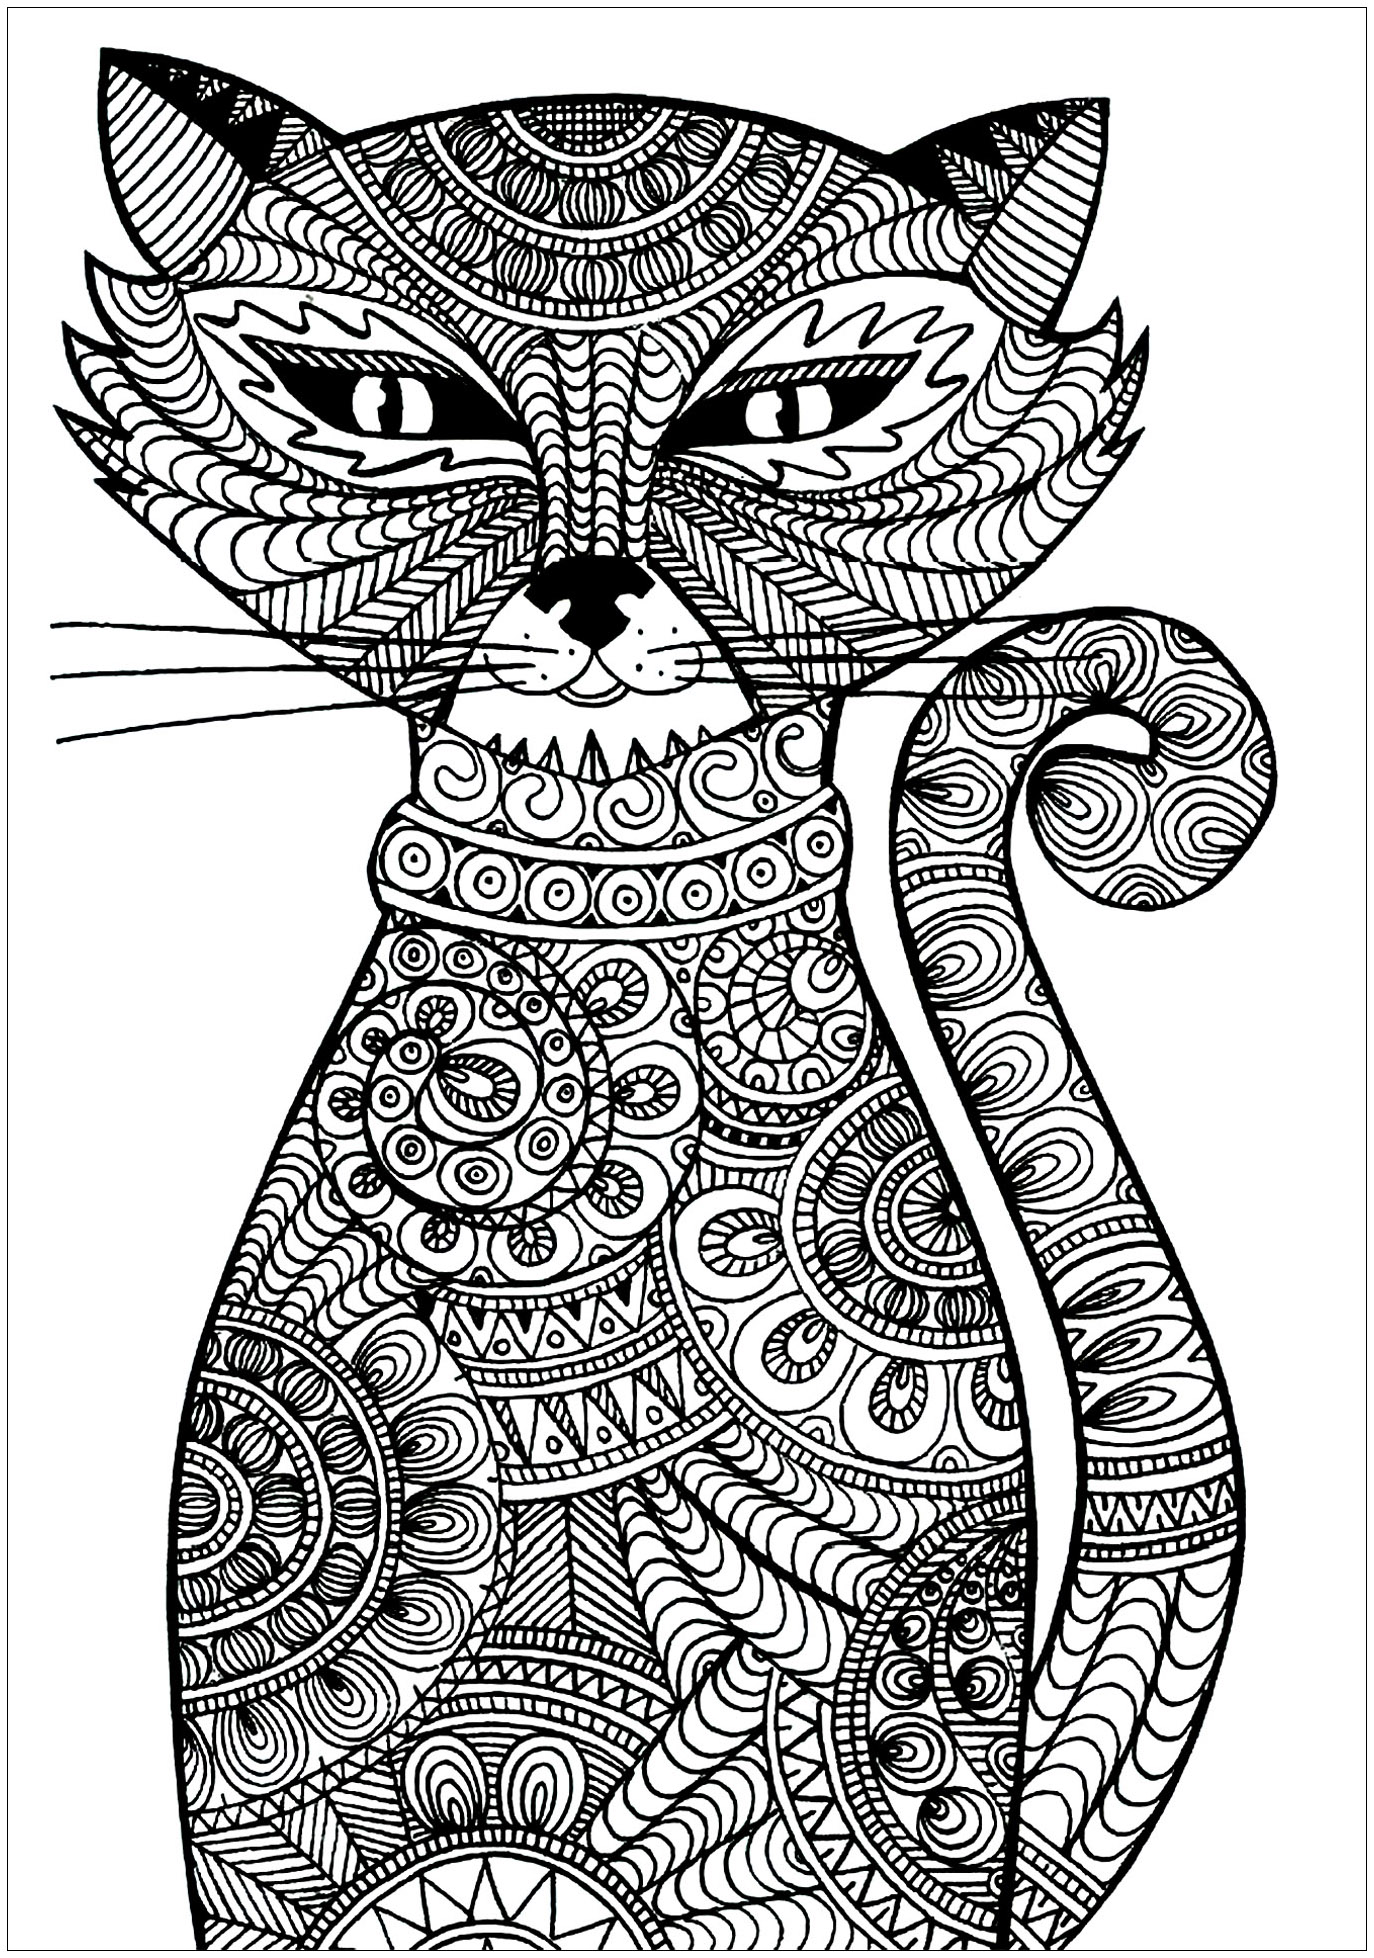 Download Pet - Coloring Pages for Adults